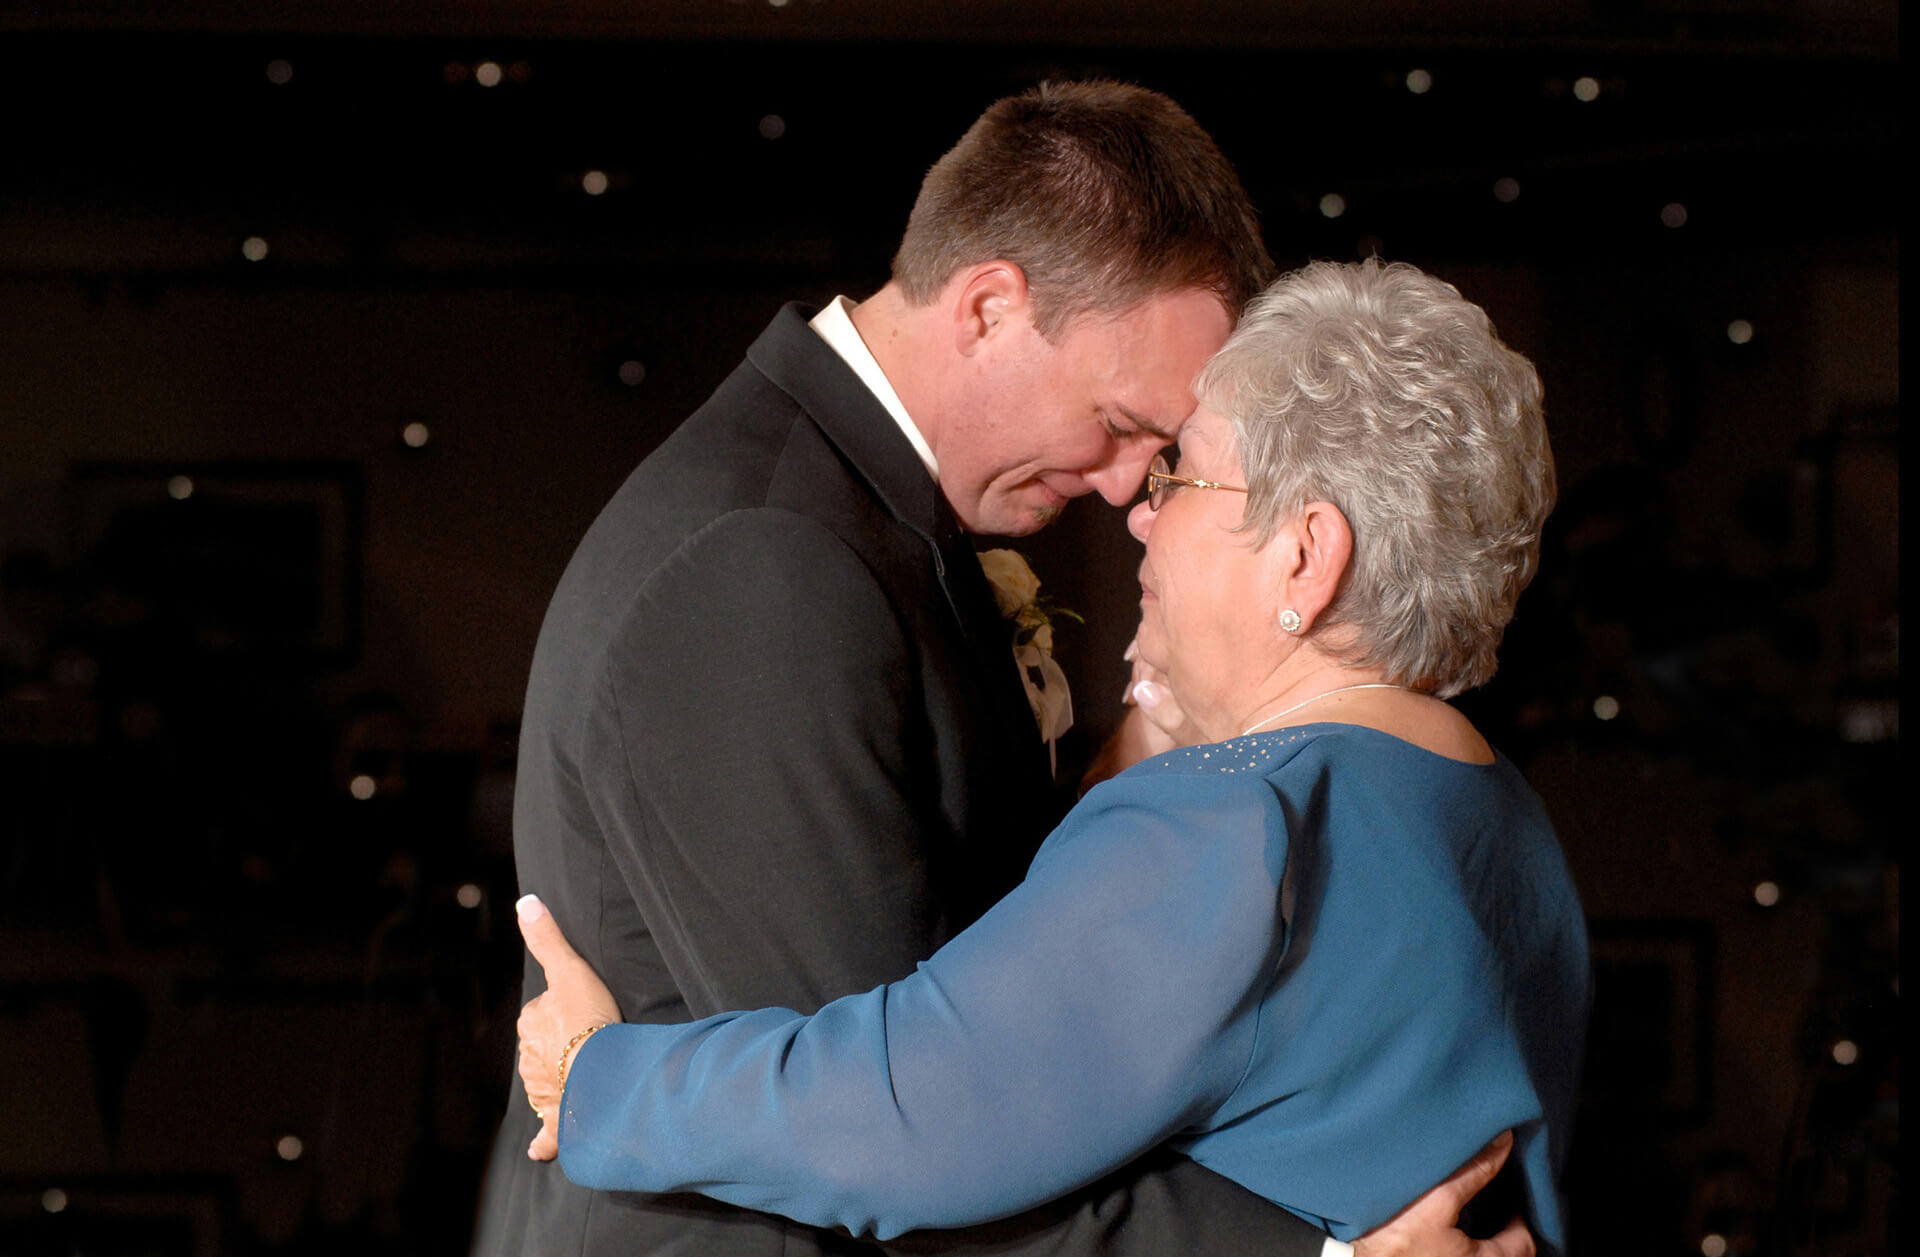 A Lake Orion, Michigan groom cries as he dances with his mother at his wedding as captured by one of the most affordable Michigan wedding photojournalists.